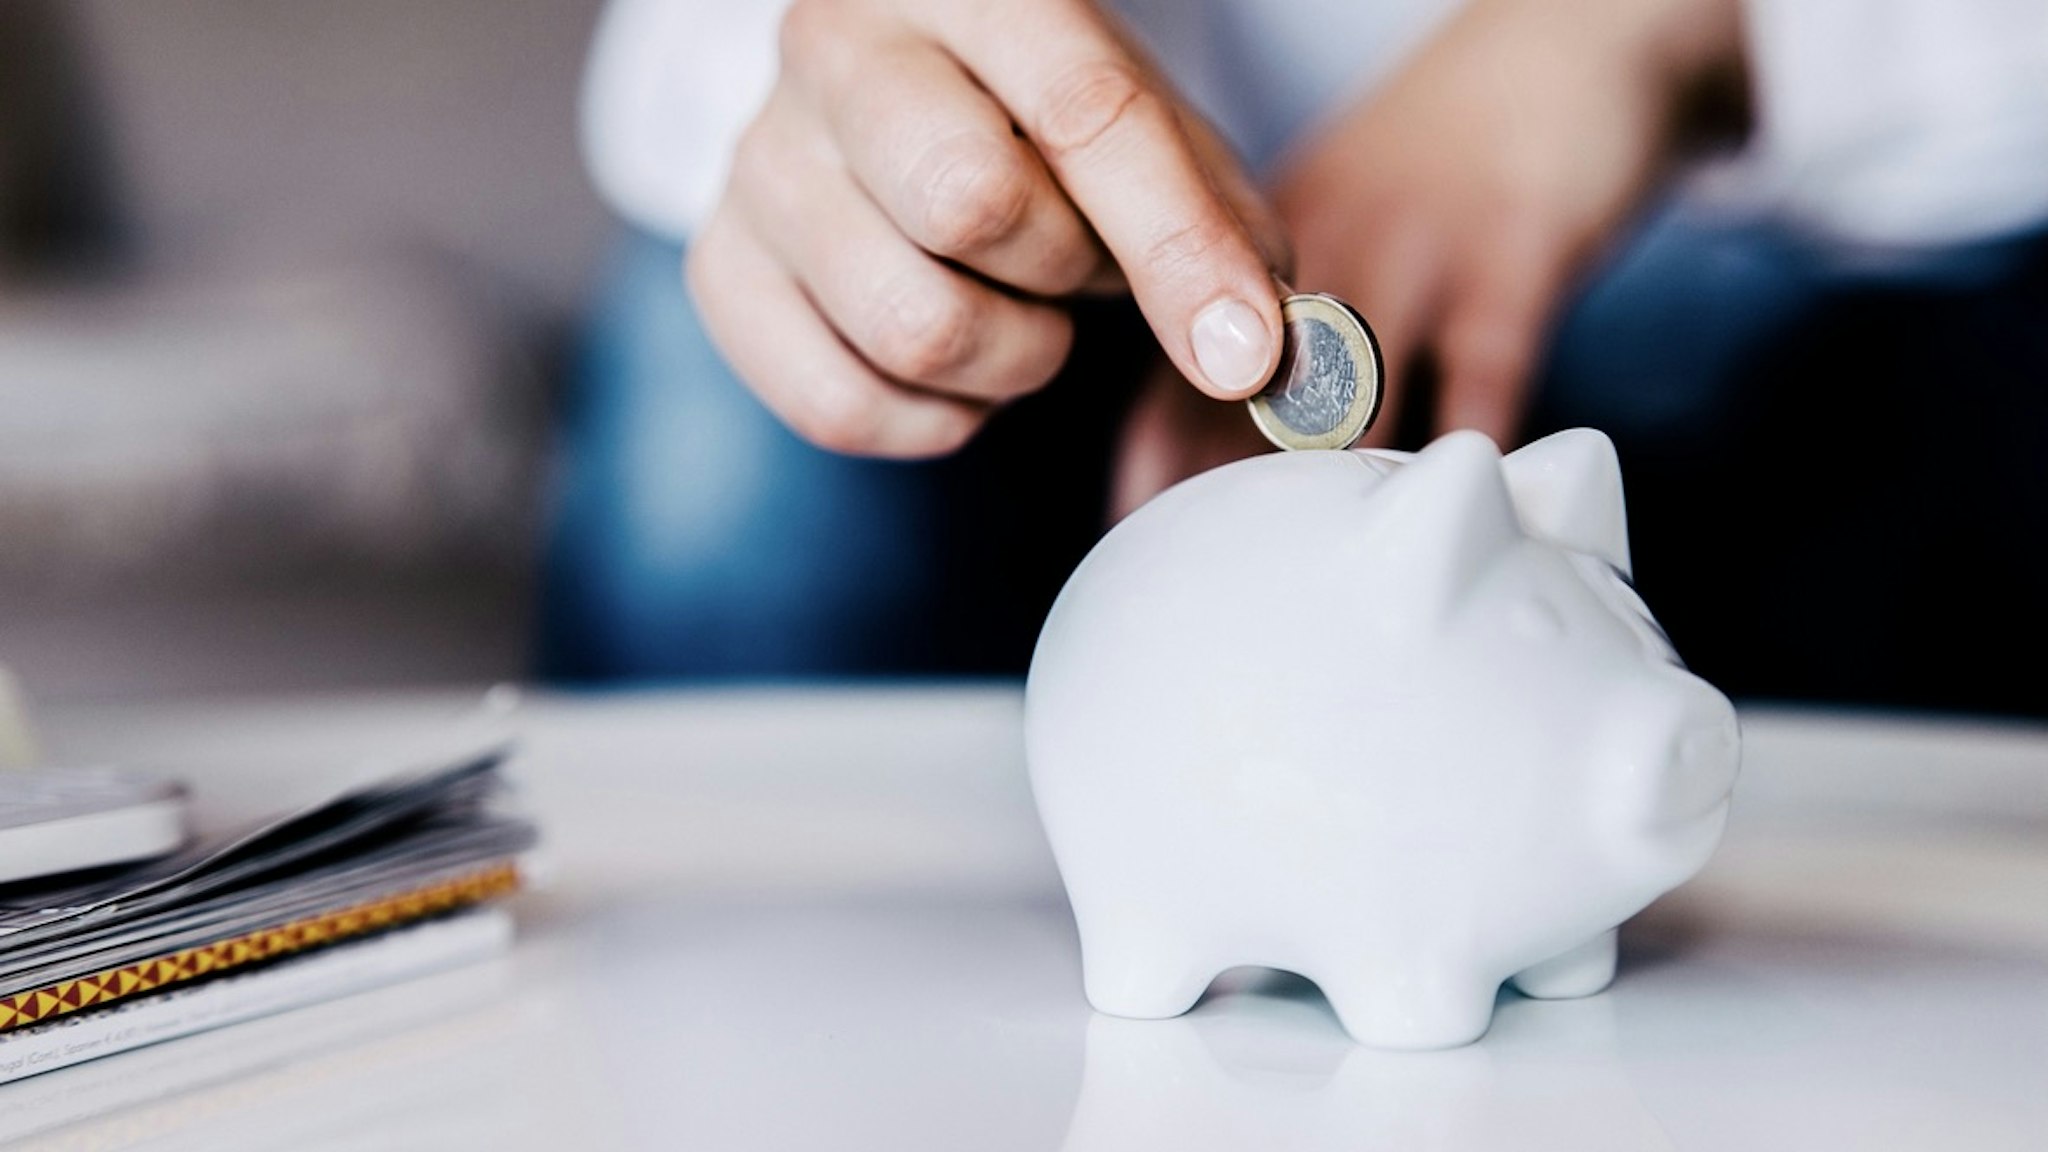 Putting a coin in a white piggy bank at home. - stock photo Putting a coin in a white piggy bank at home. Guido Mieth via Getty Images